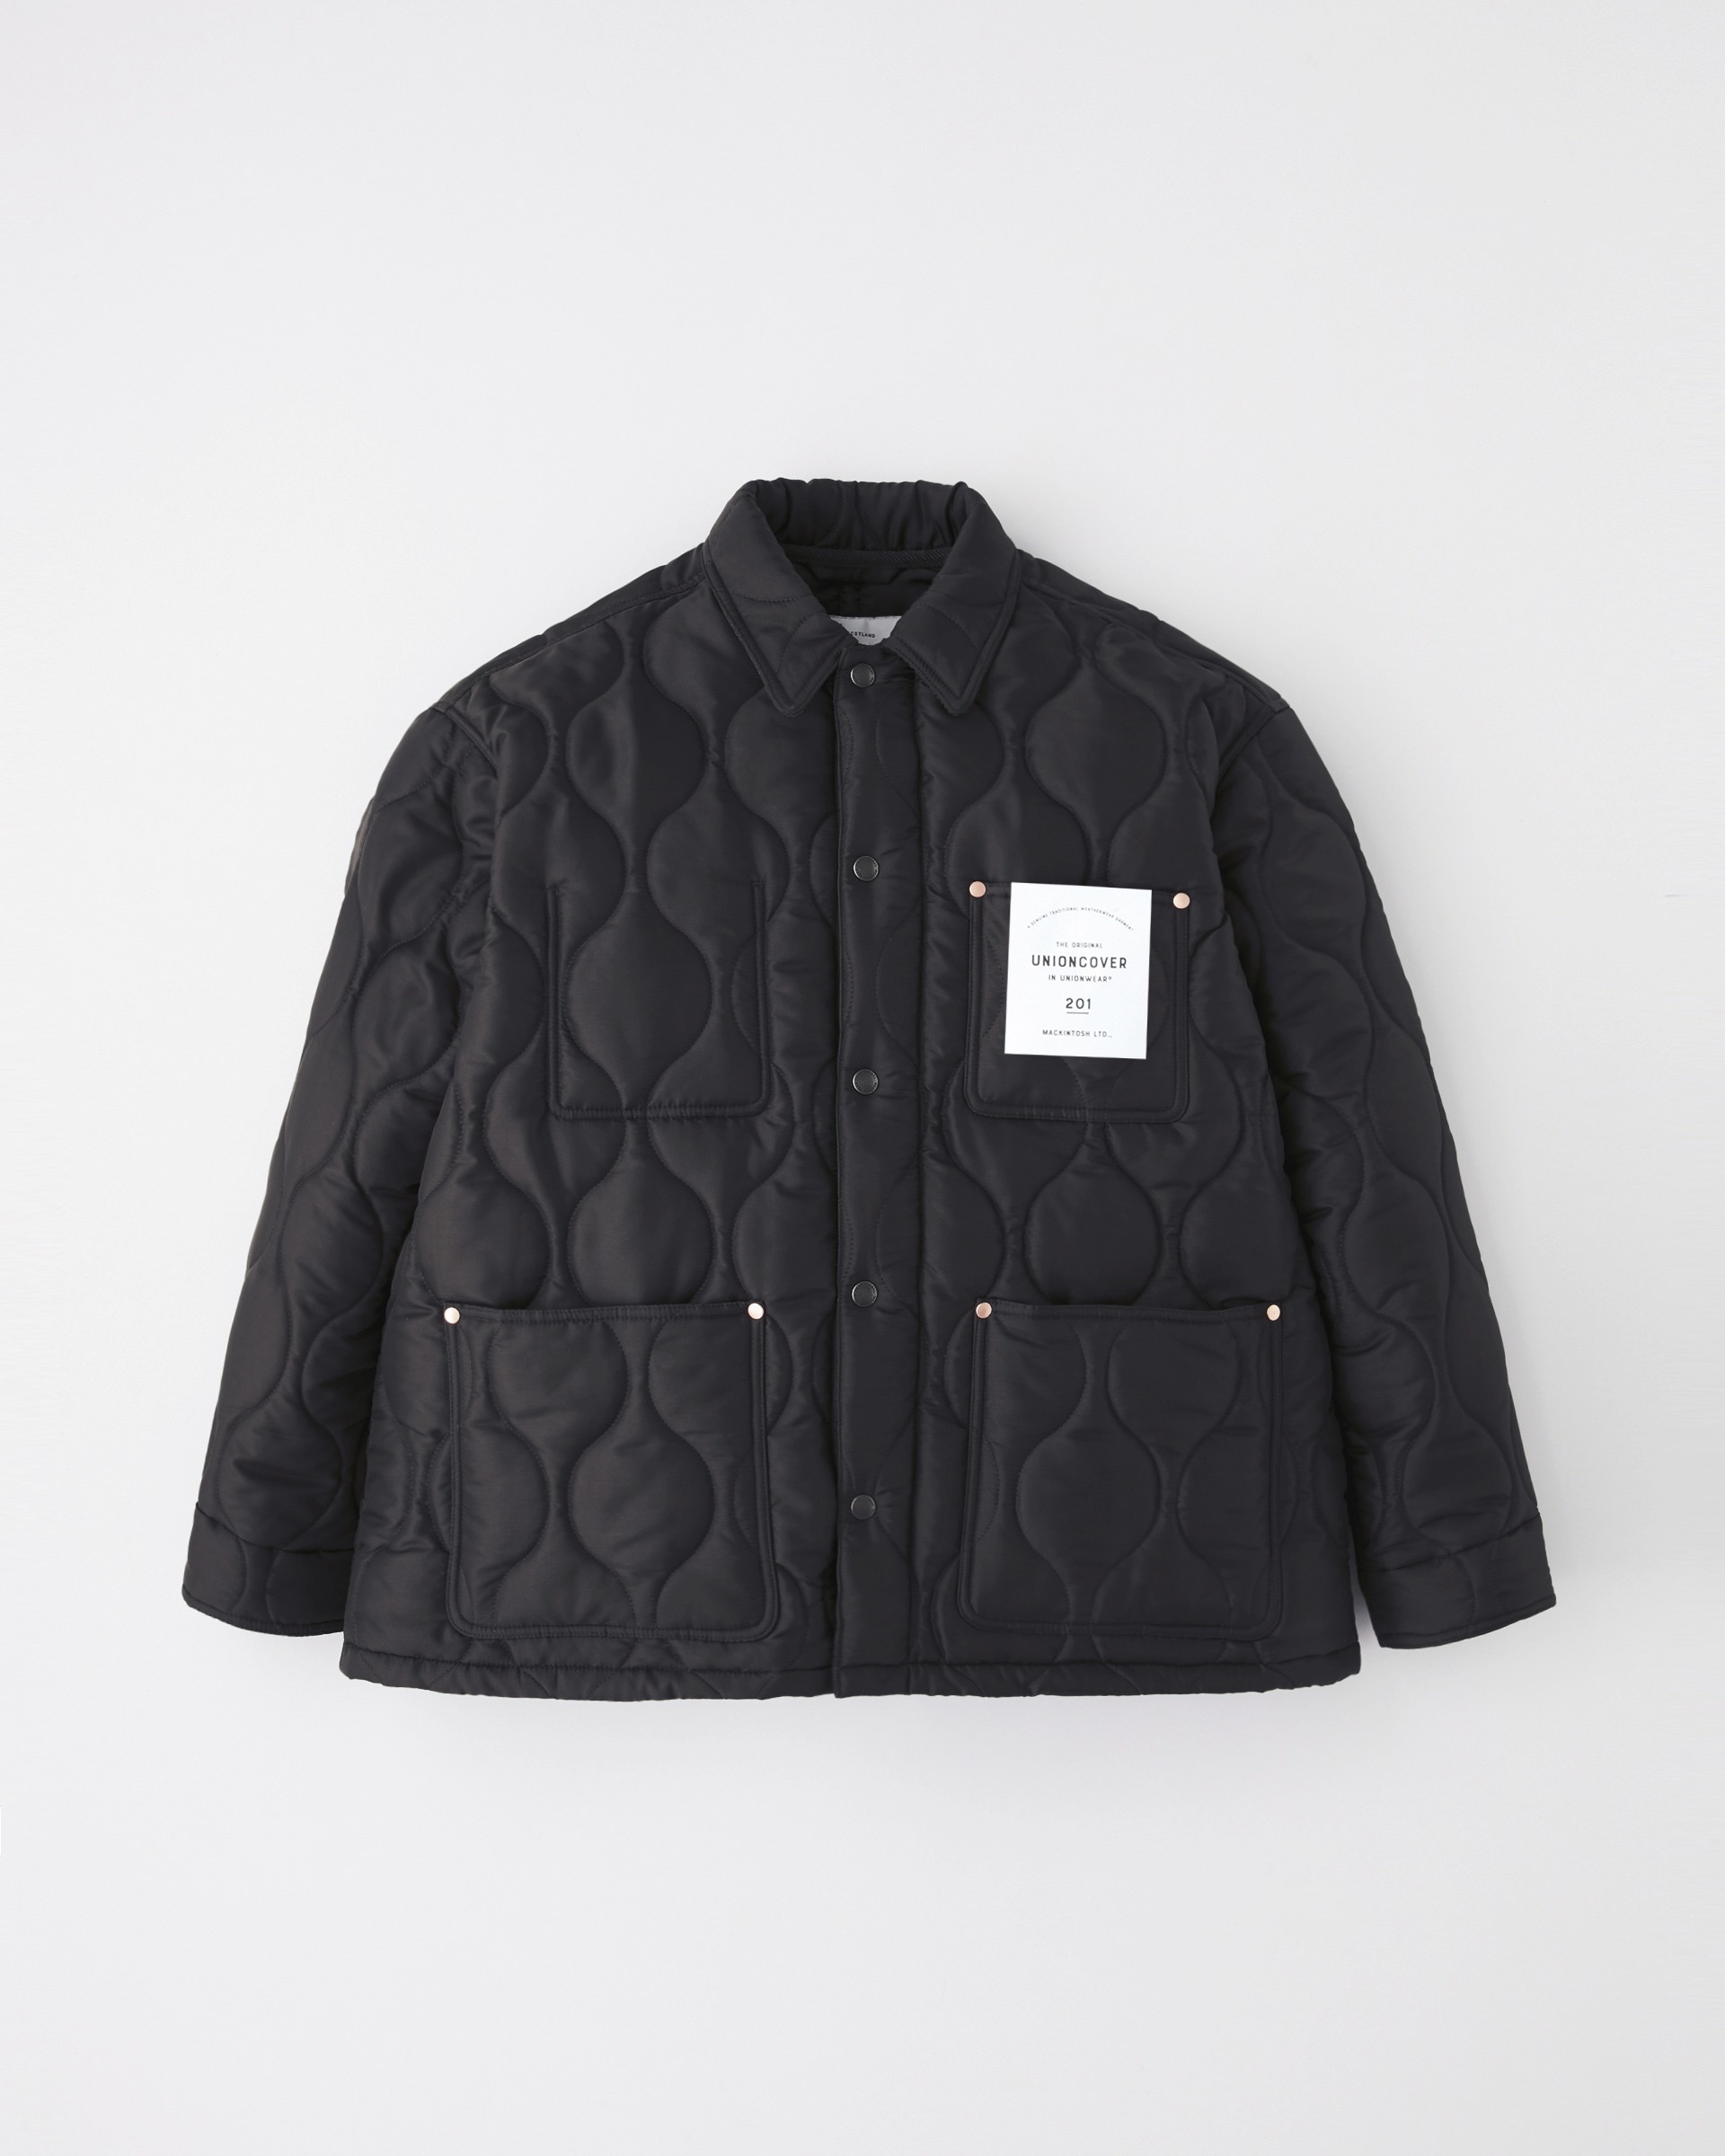 UNIONCOVER 201 QUILT |Traditional Weatherwear ...